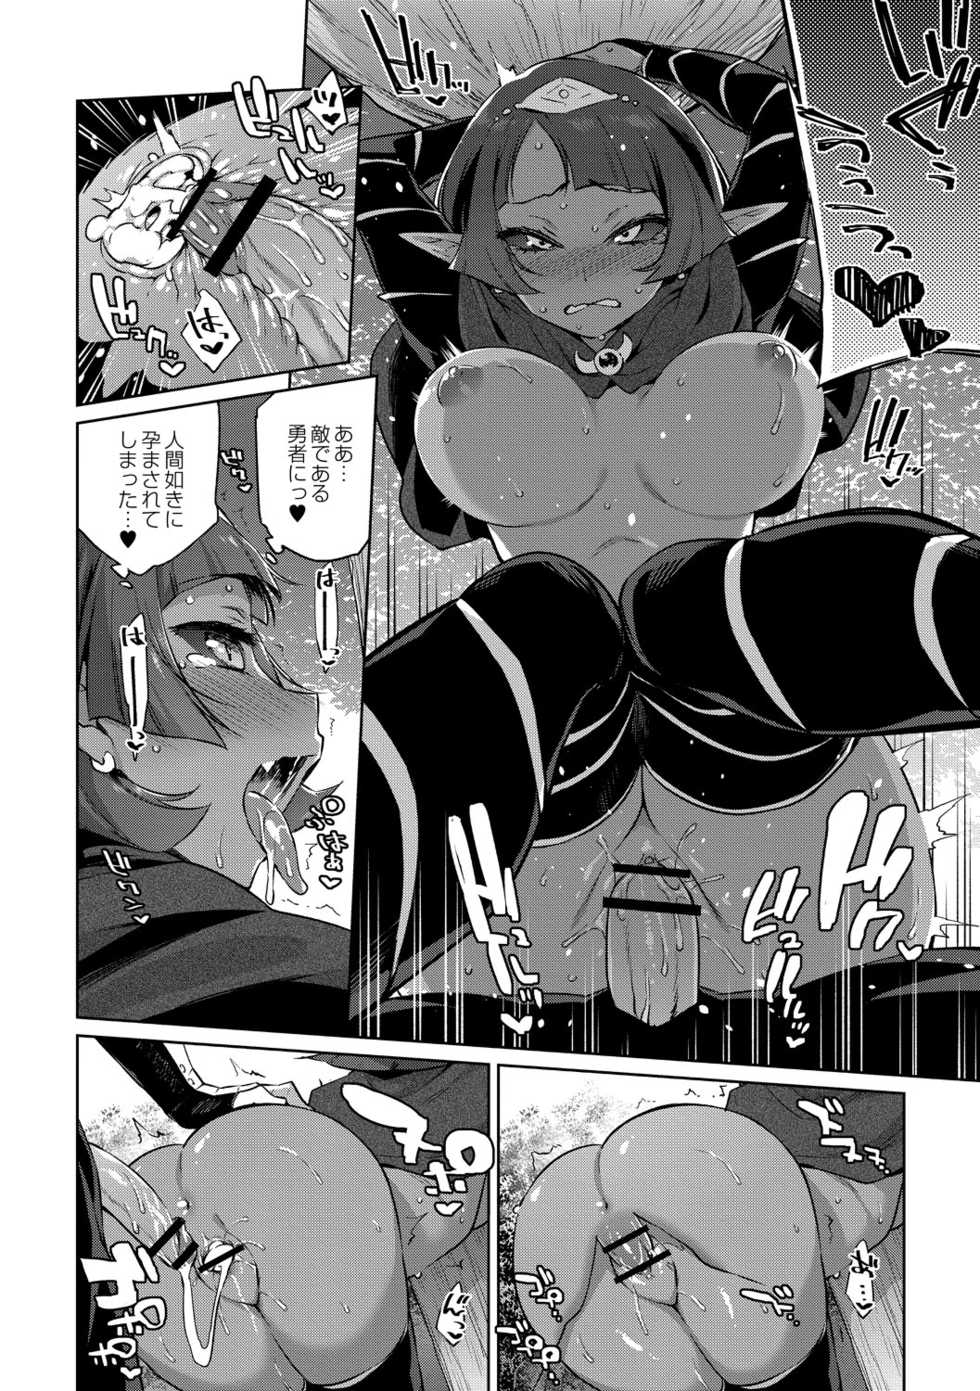 [Mizone] Monster Musume no Otoshikata - How to Corrupt a Monster Girl [Digital] - Page 11